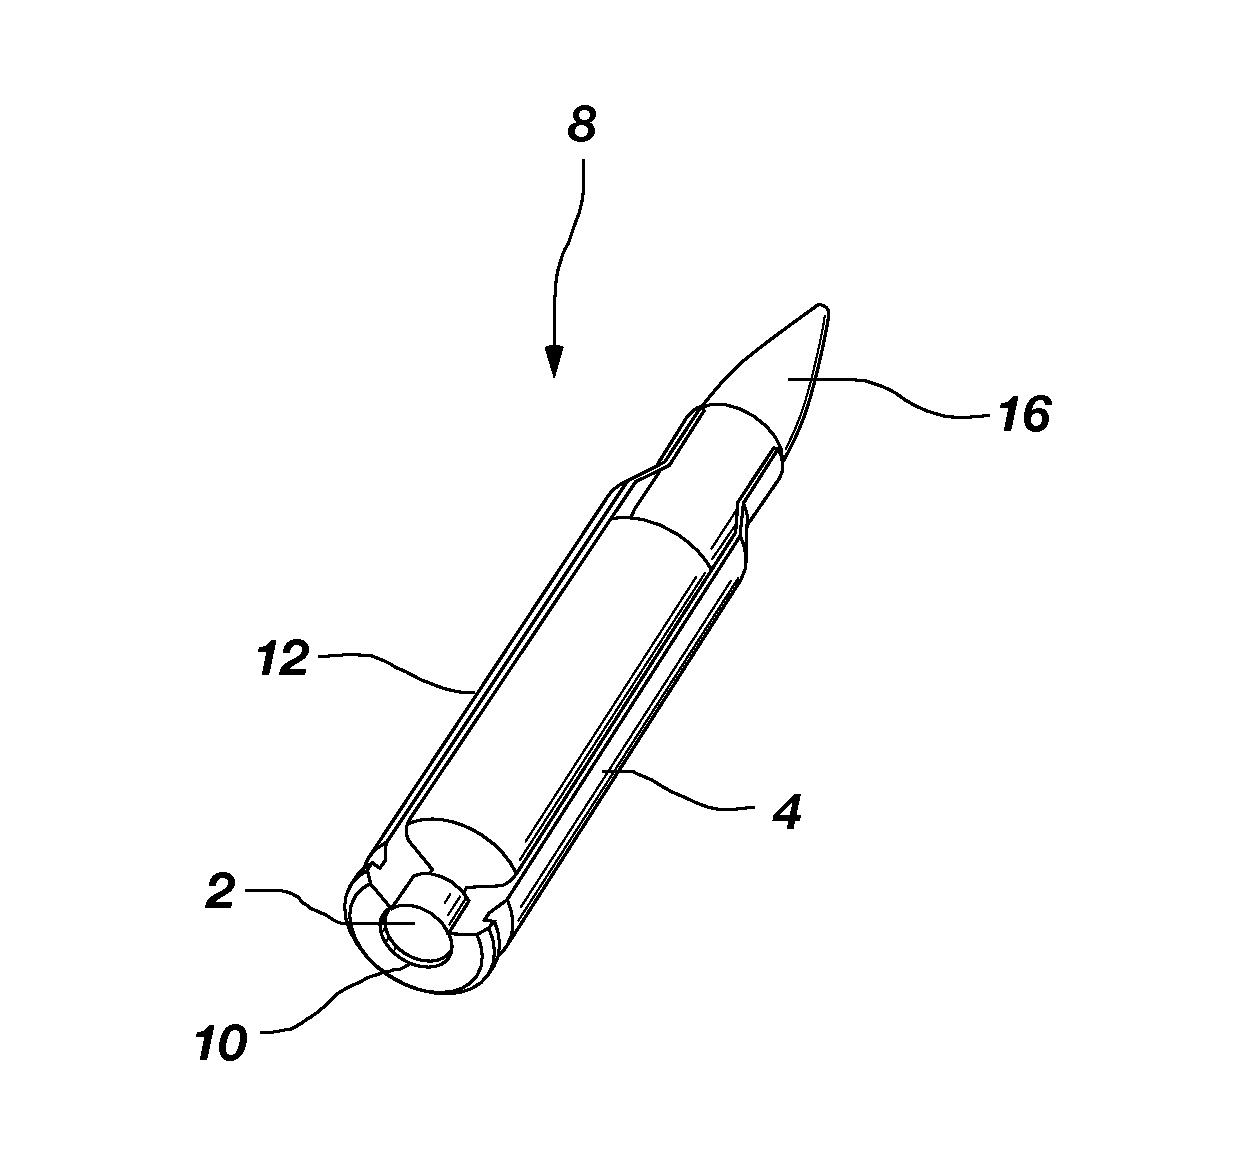 Nontoxic, noncorrosive phosphorus-based primer compositions and an ordnance element including the same